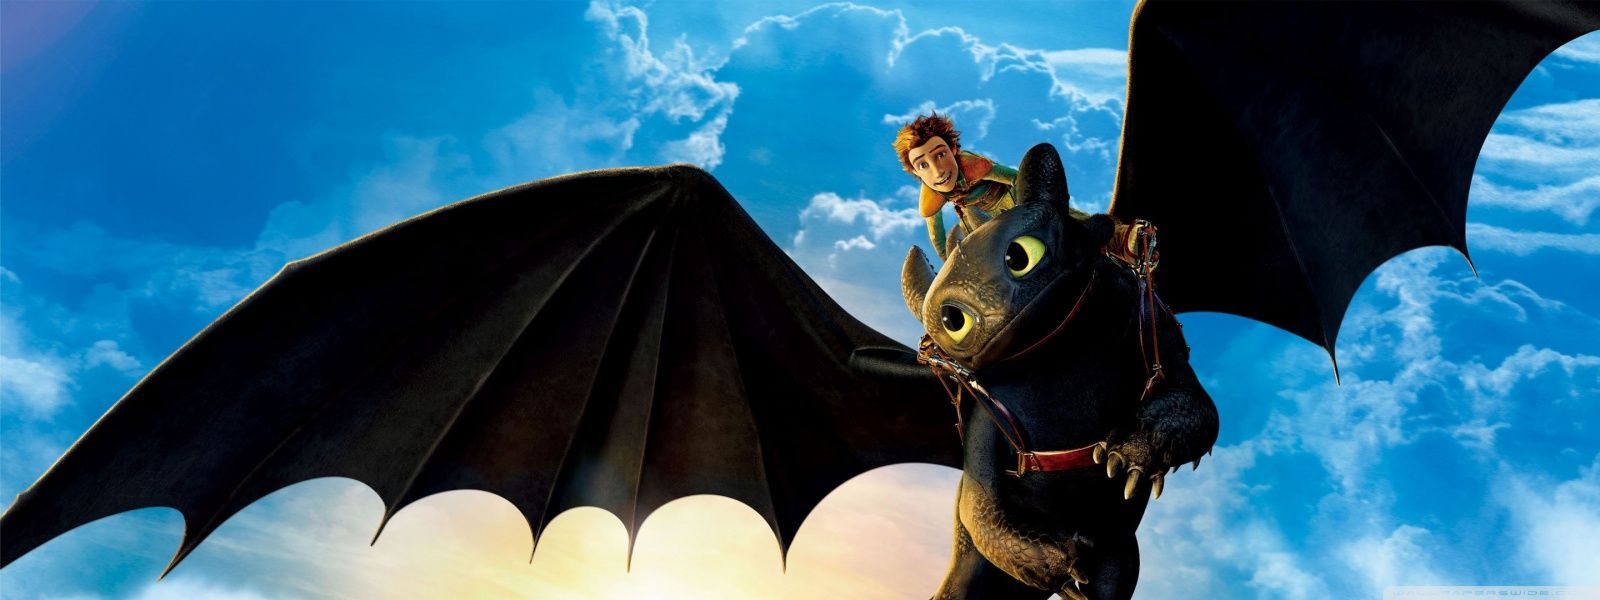 Hiccup and Toothless HD desktop wallpaper : High Definition ...